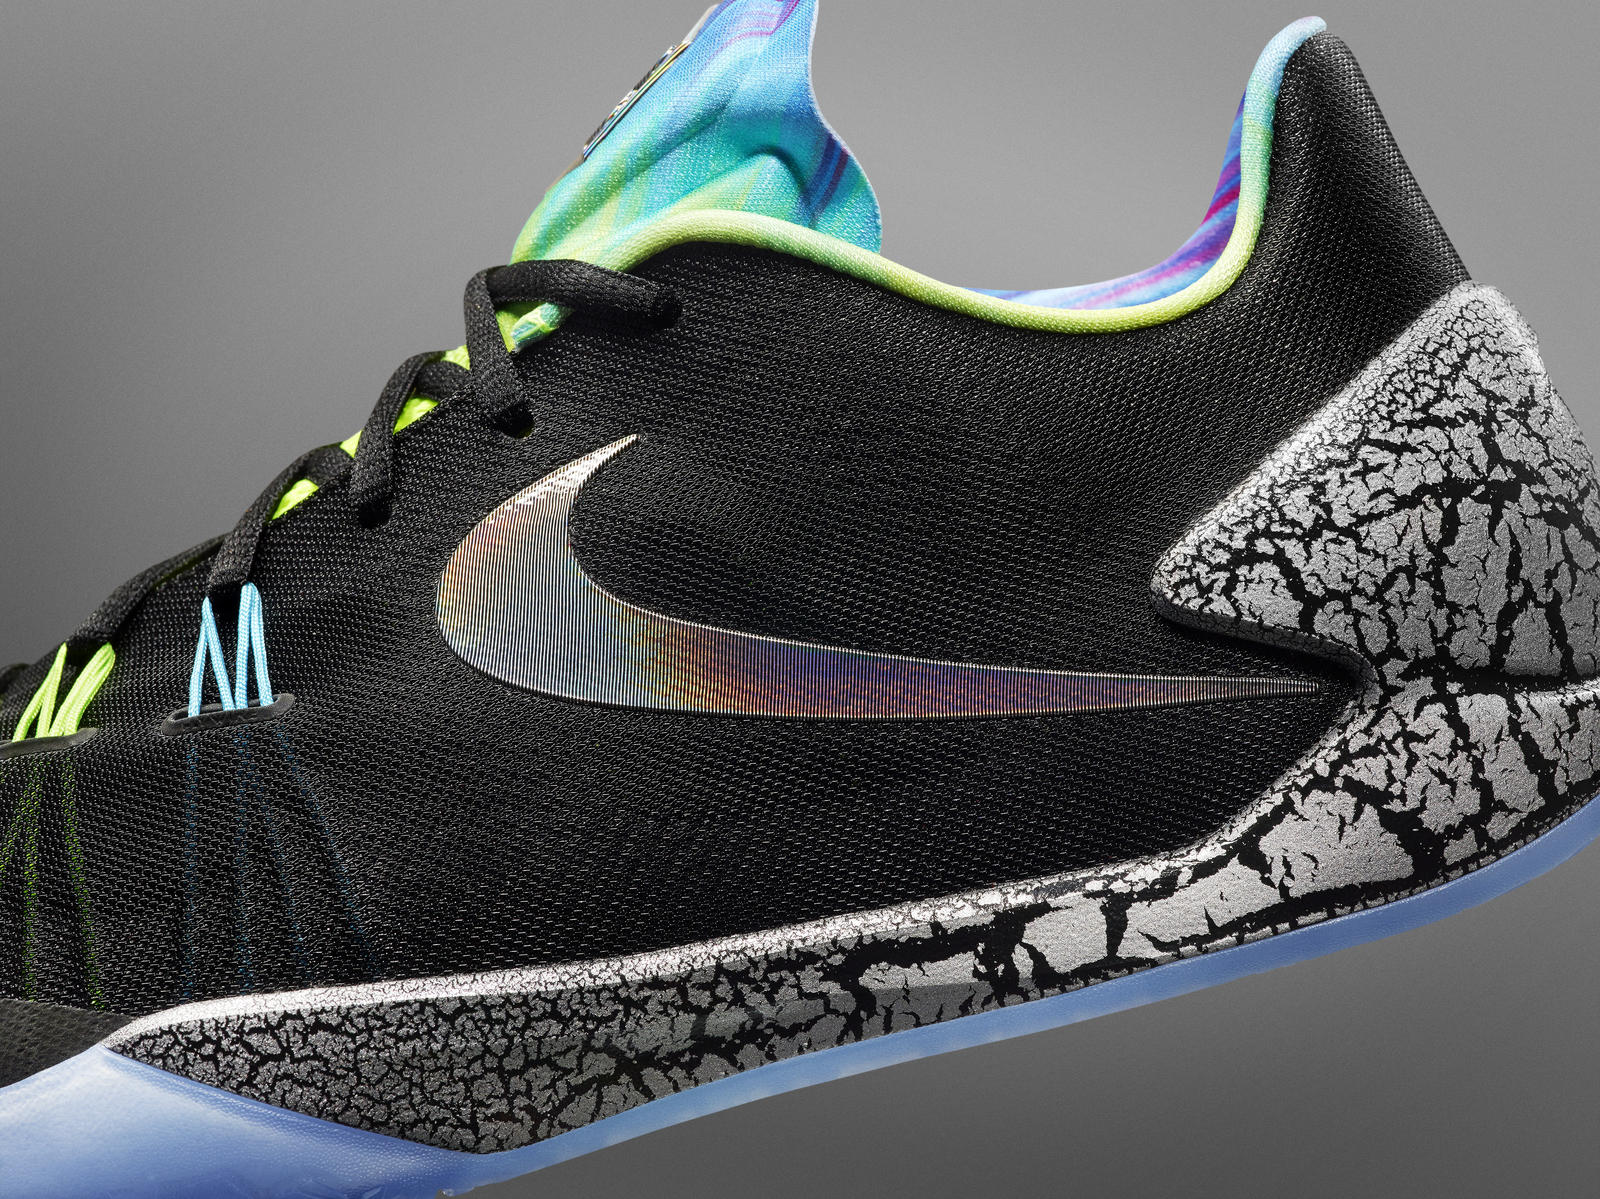 Nike HYP Chase “All-Star” James Harden 2015